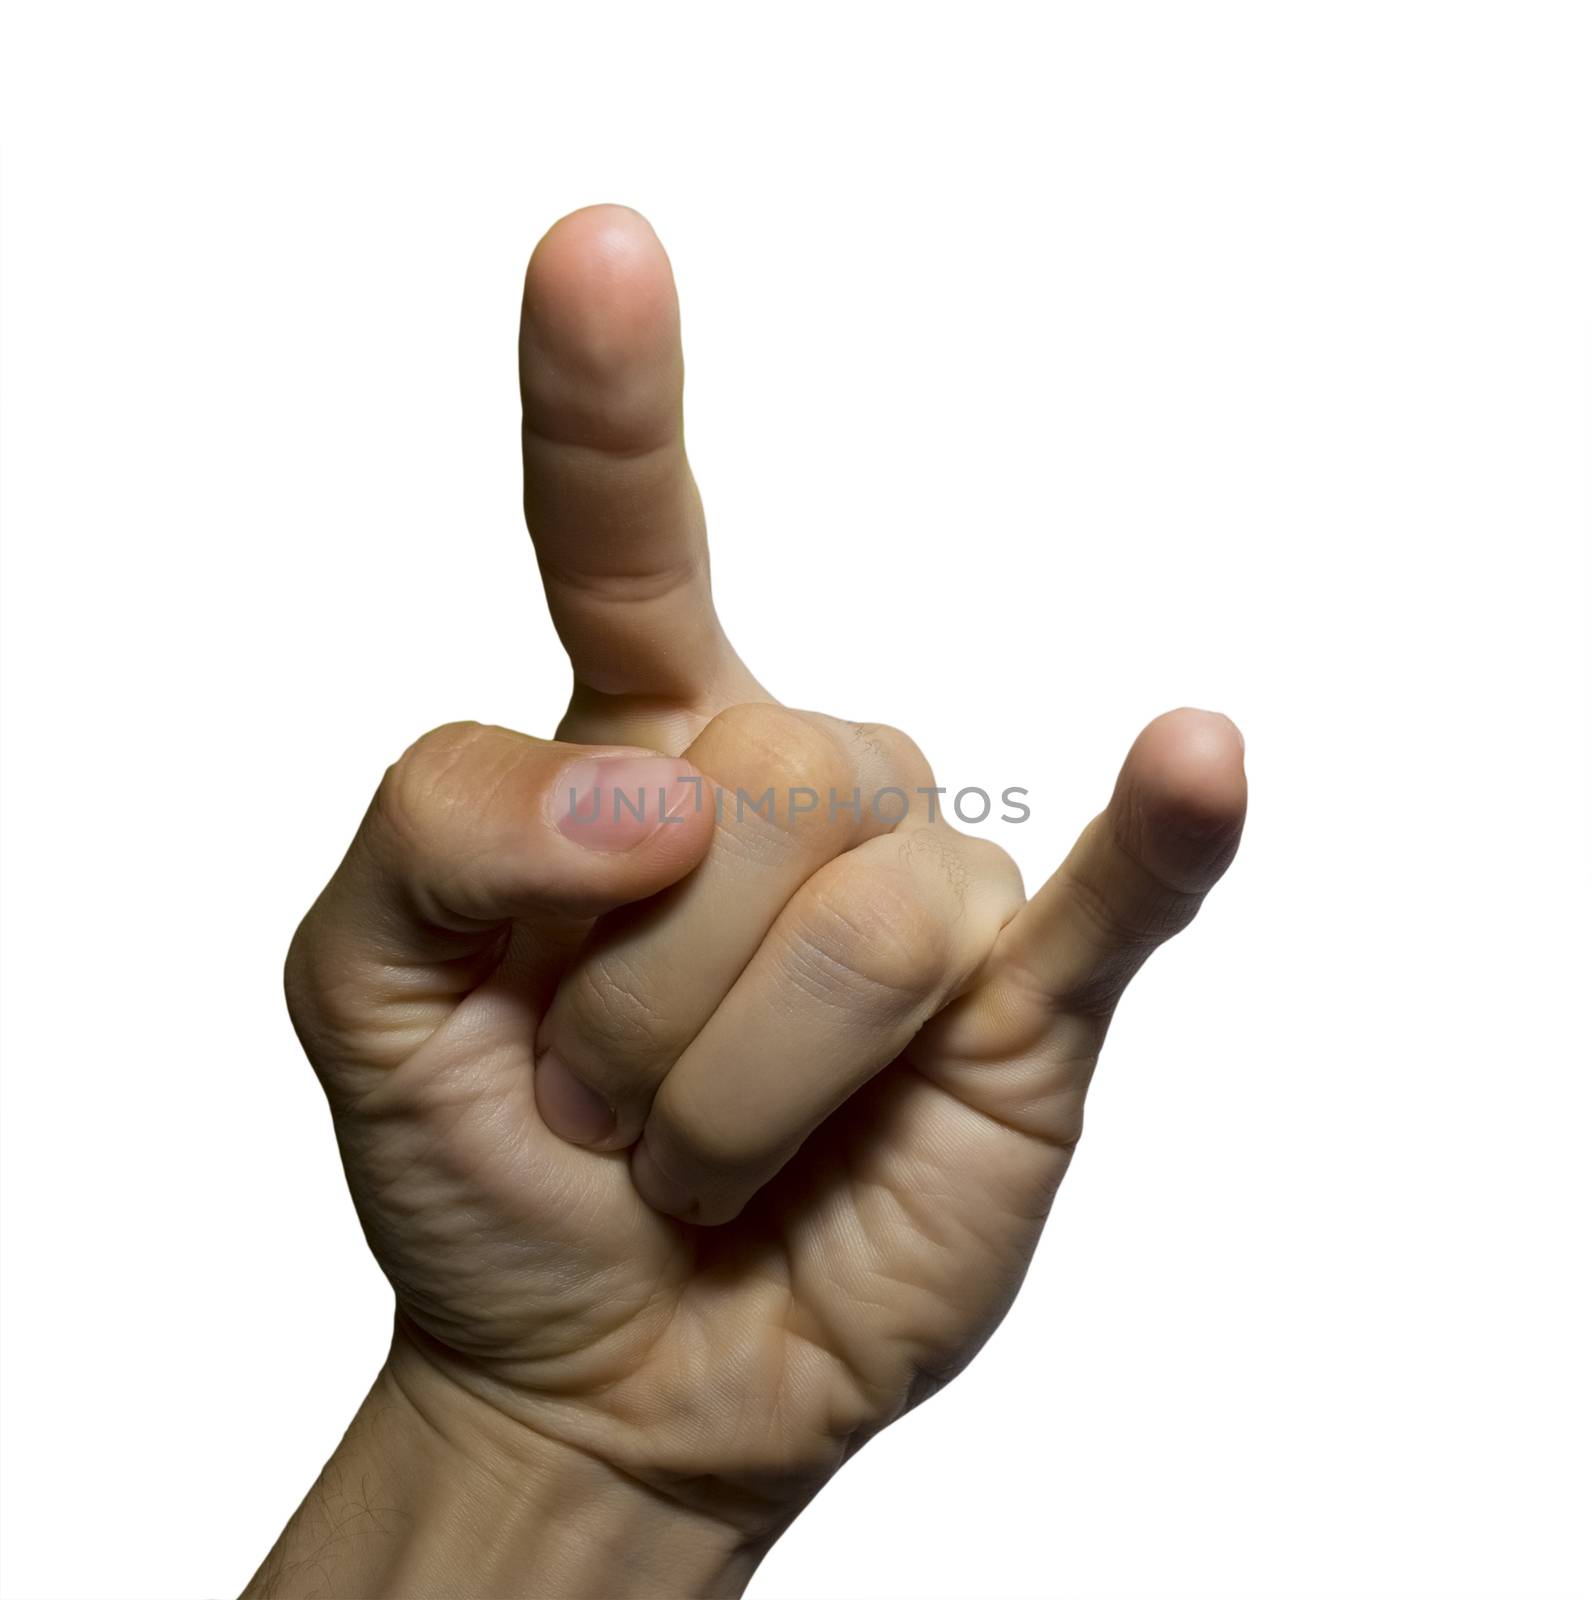 Hand showing rock n roll sign isolated on white background